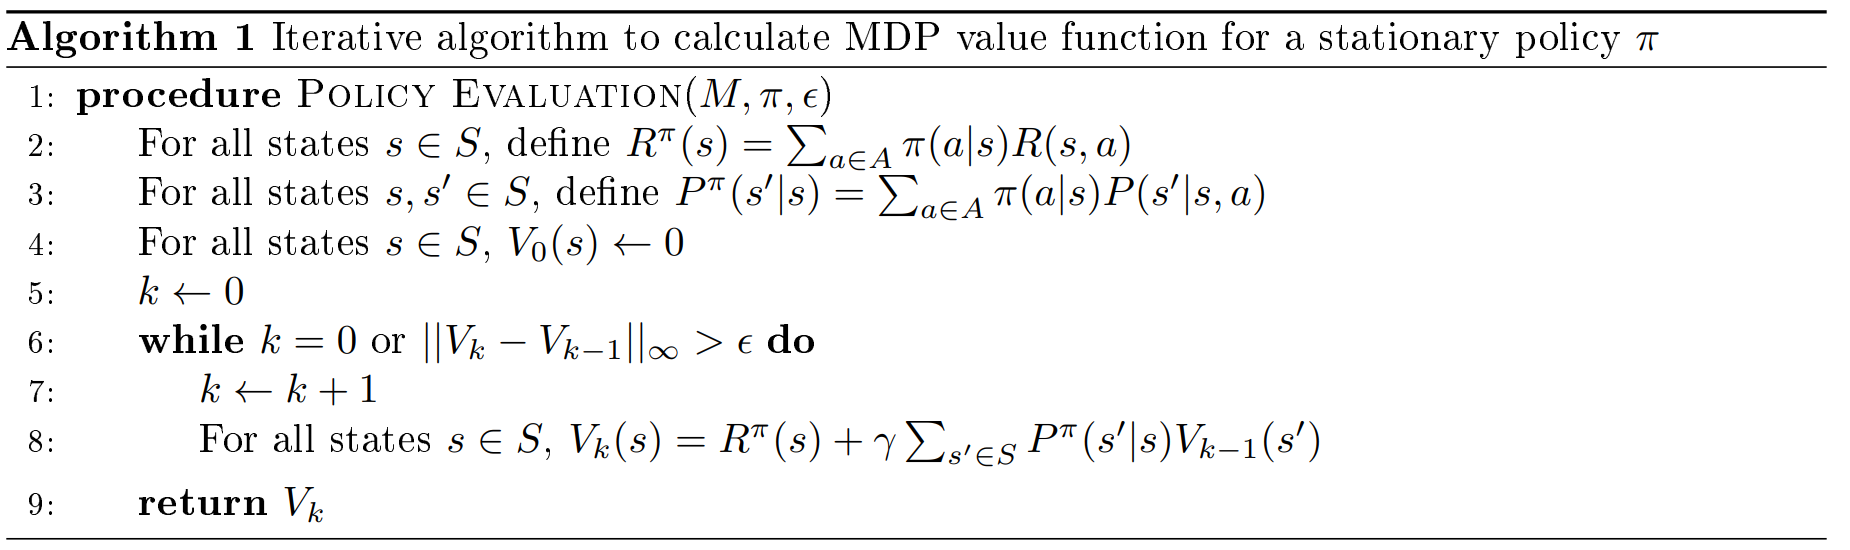 docs/stanford-cs234-notes-zh/img/fig3_alg_1.png